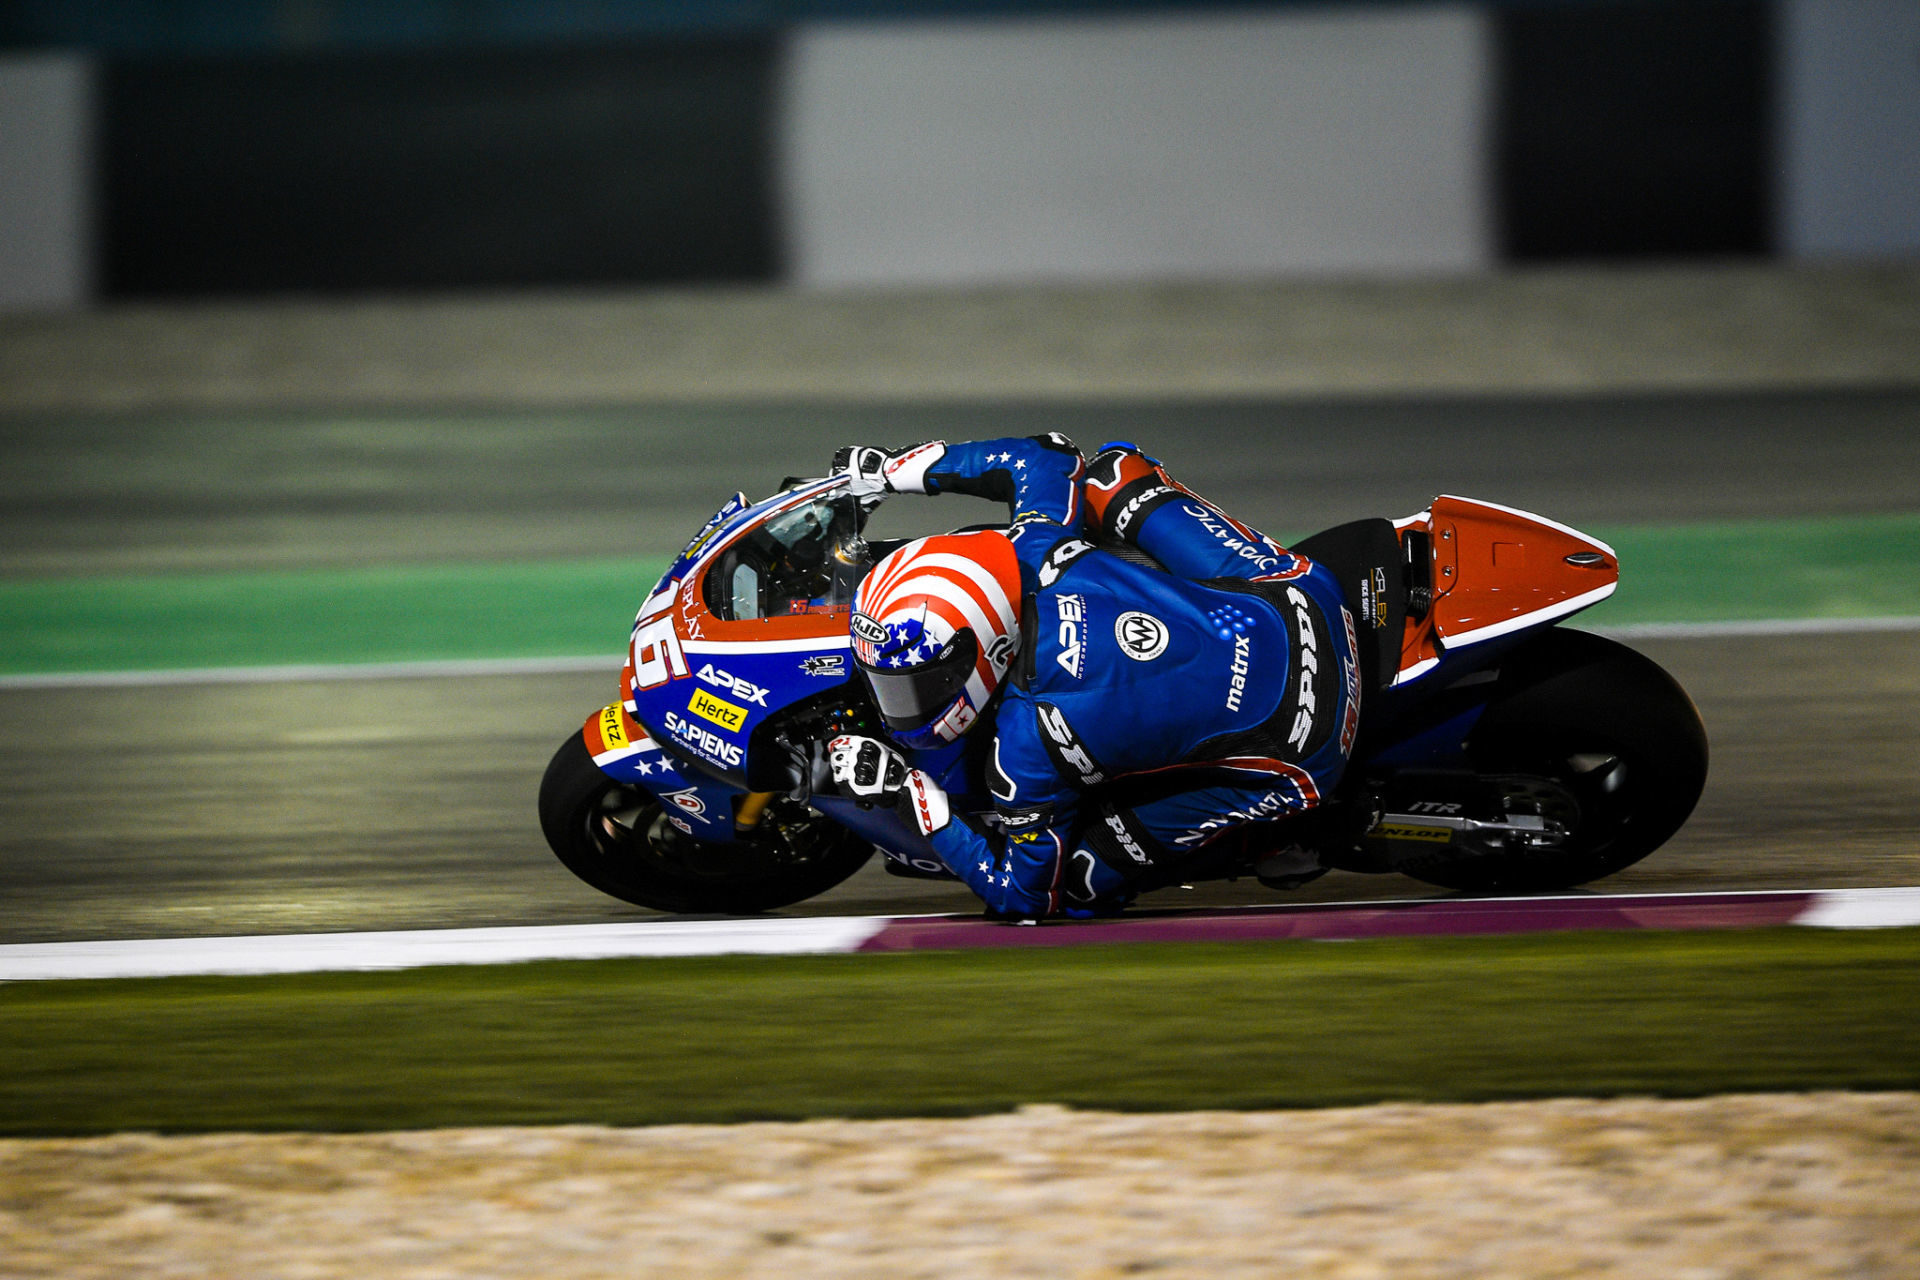 Joe Roberts (16) in action during the 2020 Moto2 World Championship opening round at Losail International Circuit, in Qatar. Photo courtesy of American Racing Team.